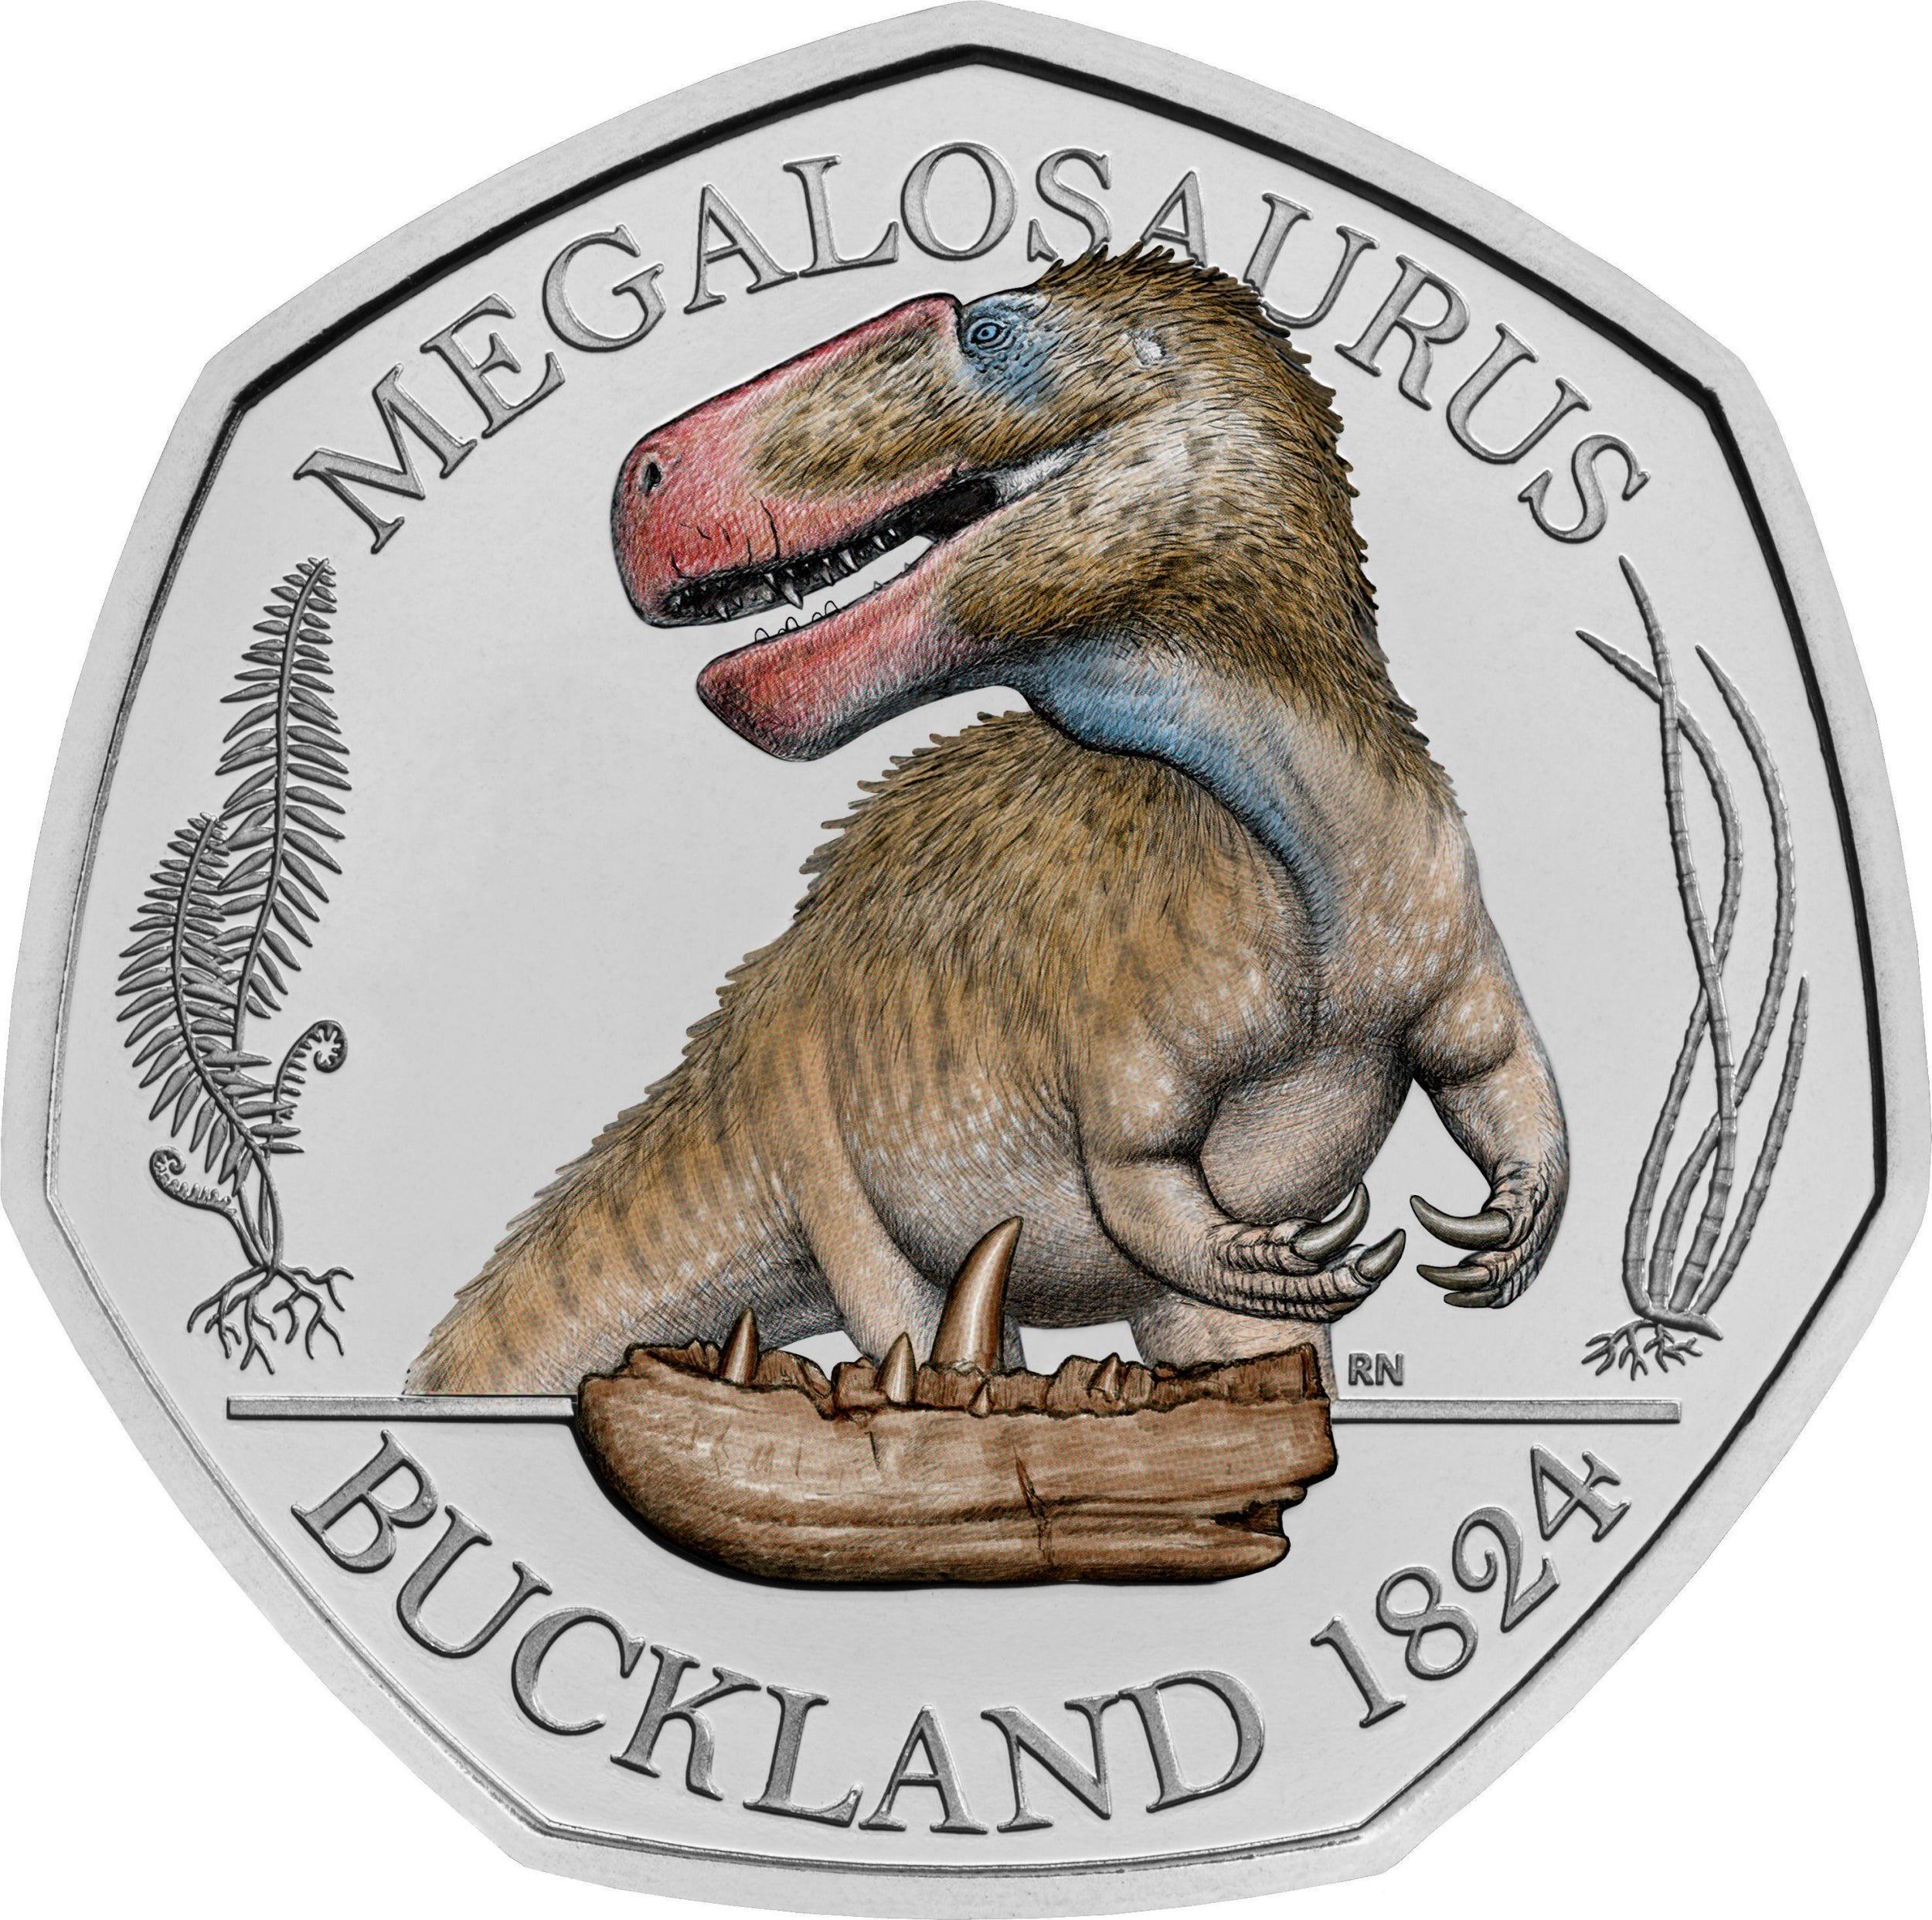 A commemorative 50 pence coin from the Royal Mint Dinosauria Collection which shows a Megalosaurus